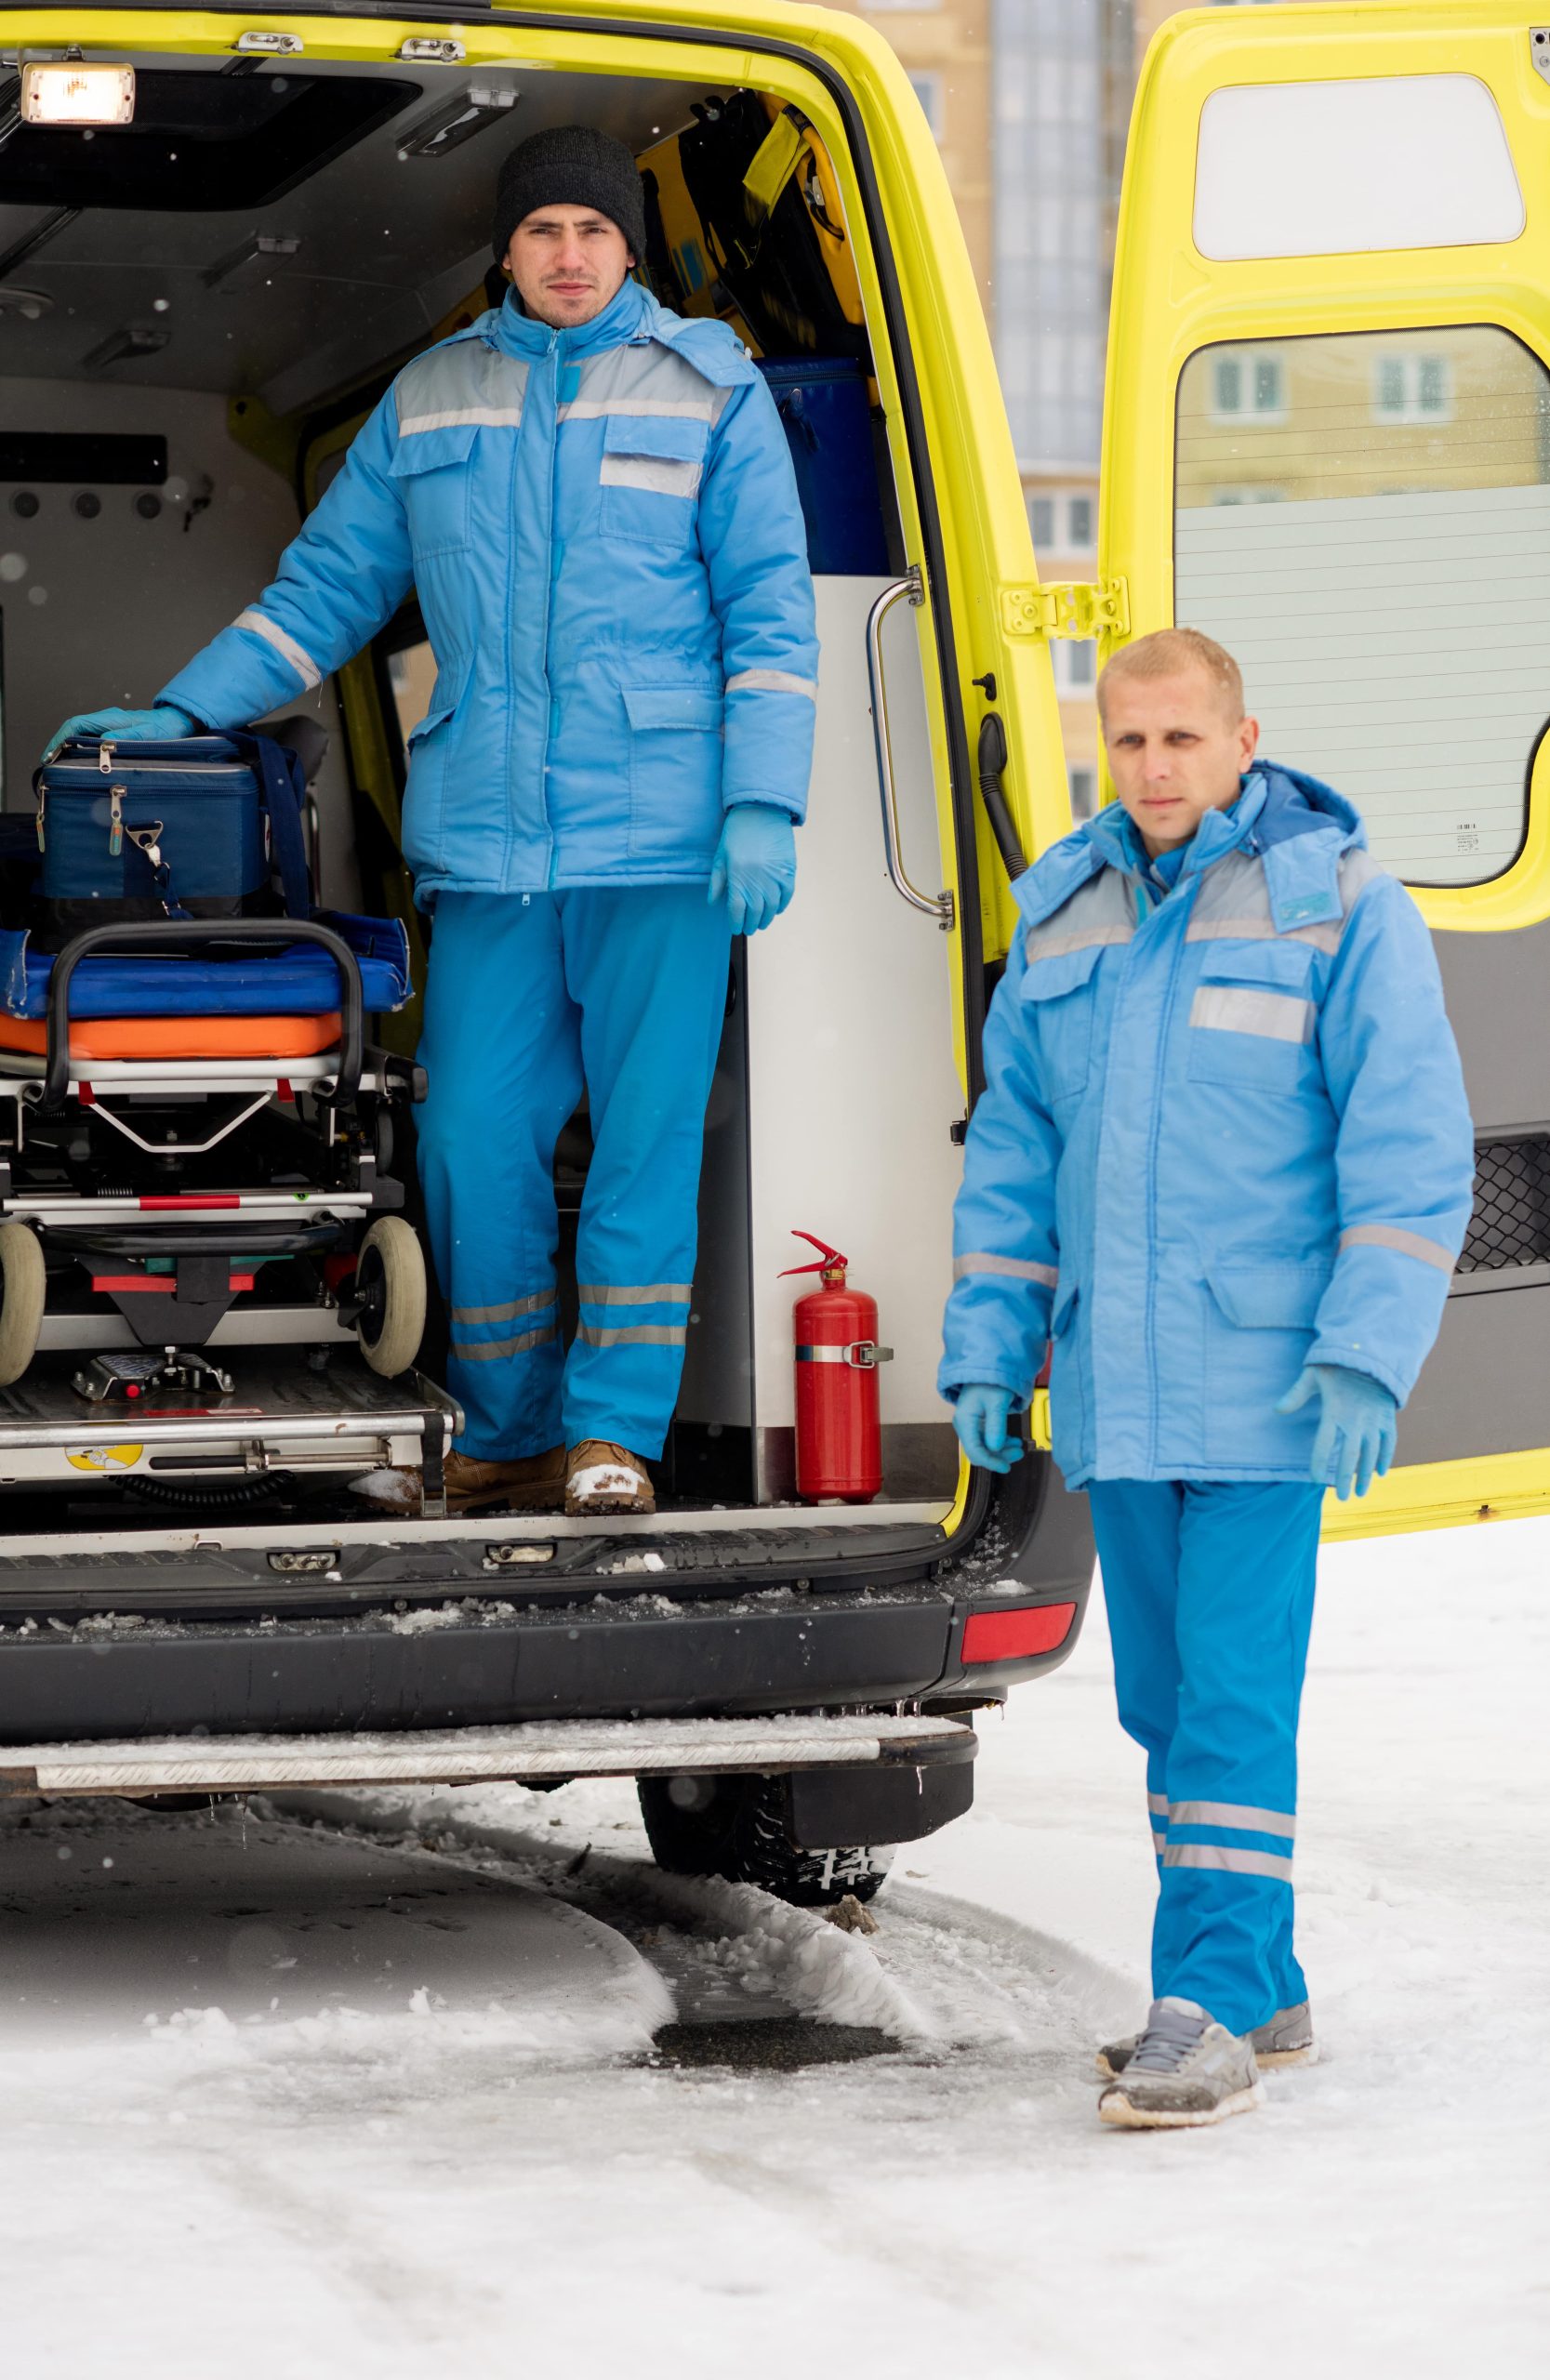 Read more about the article Life on the Line Emergency Medical Transport Services Unveiled